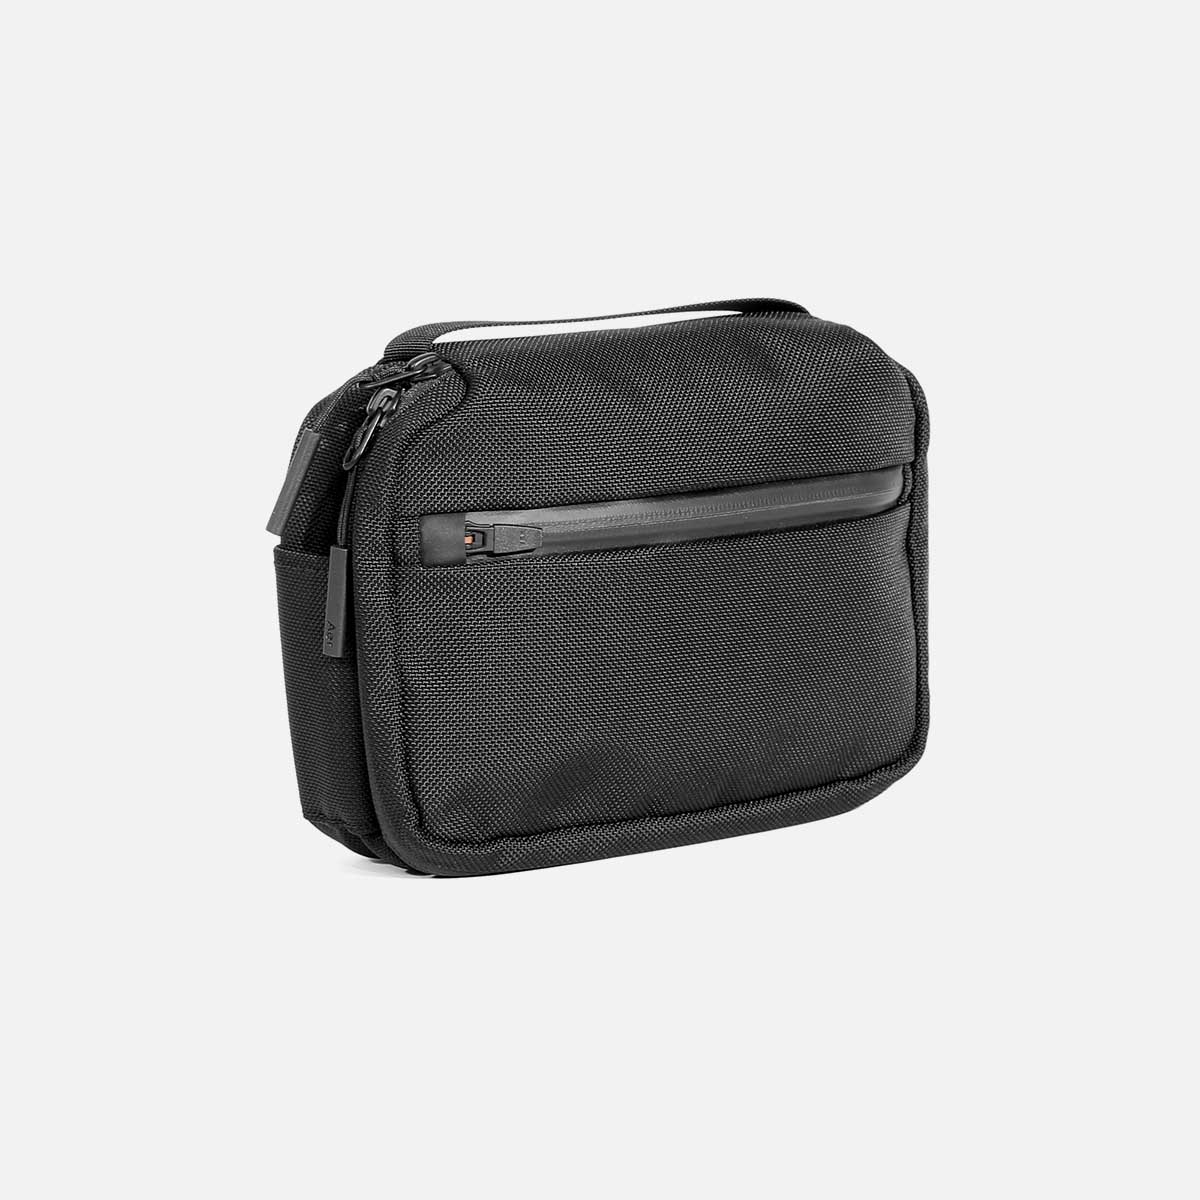 Amazon.com : Maliton Toiletry Bag for Men & Women | Large for Traveling |  Hanging Compact Hygiene Bag with 4 Compartments | Waterproof Bathroom  Shower Bag (Black) : Beauty & Personal Care